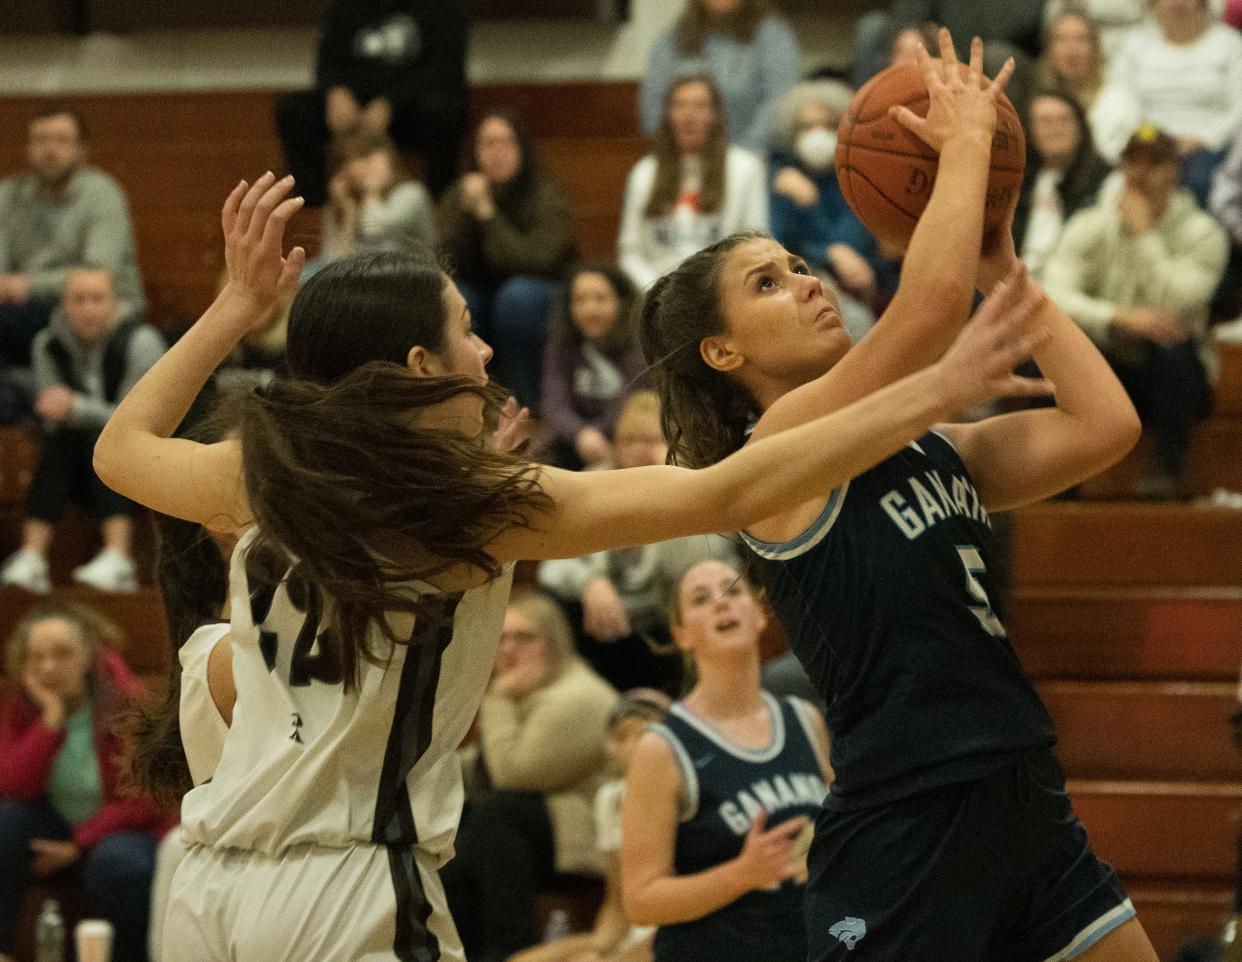 Gananda's Eva Jenny goes for a layup while East Rochester's Gianna Romach defends.